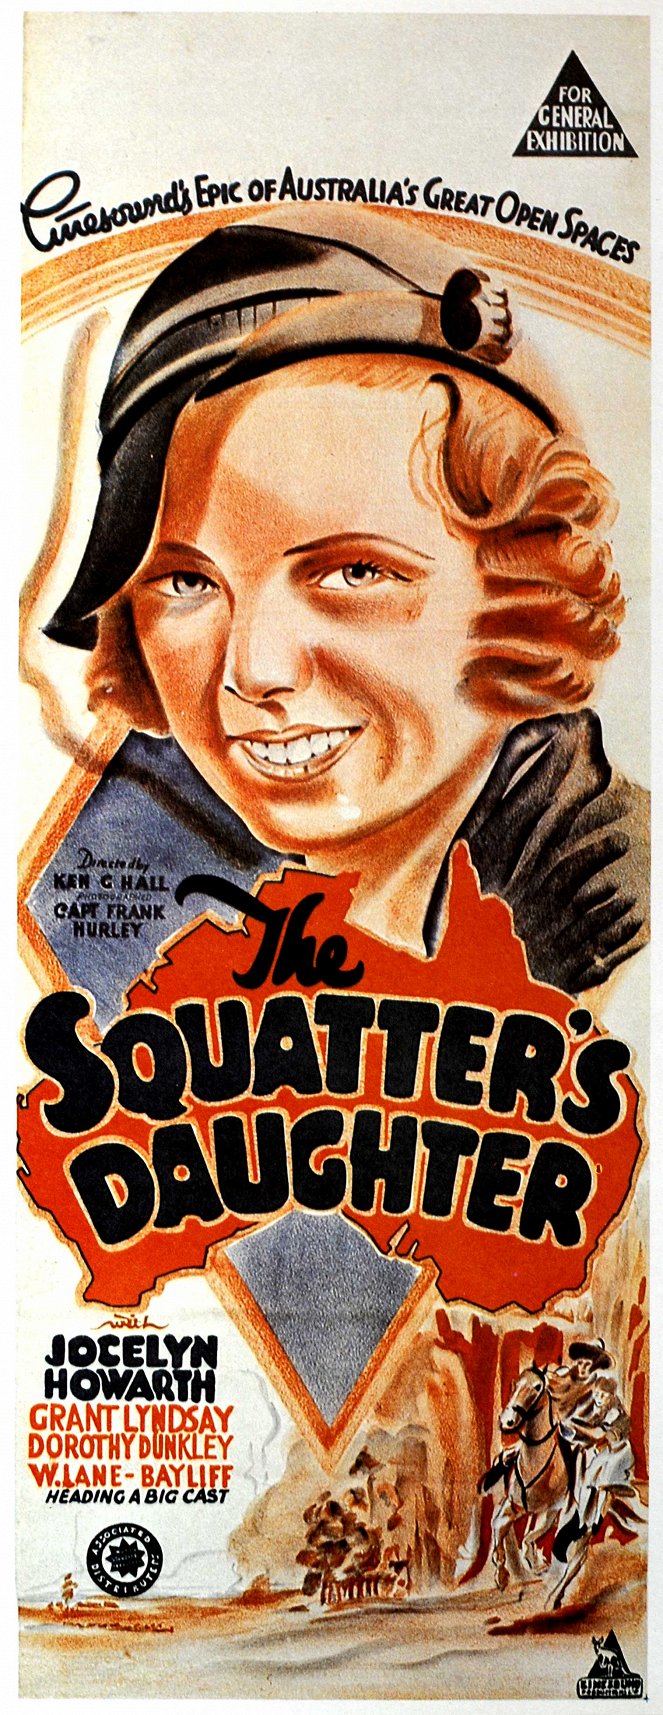 The Squatter's Daughter - Posters